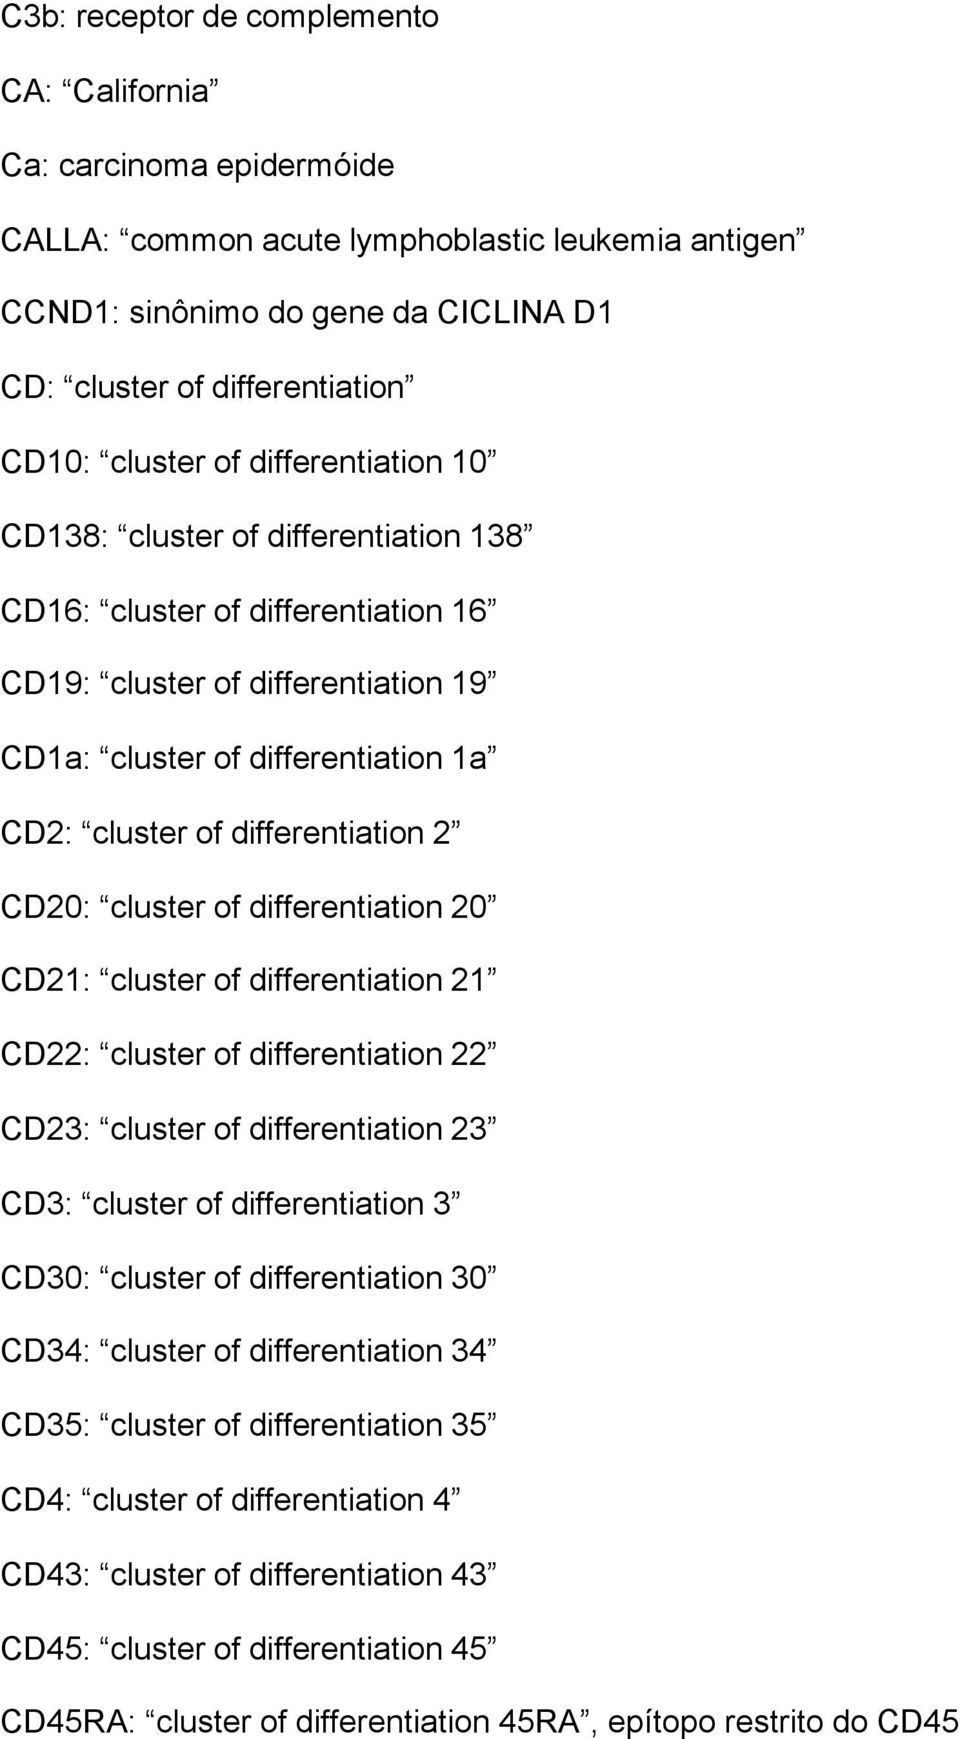 differentiation 2 CD20: cluster of differentiation 20 CD21: cluster of differentiation 21 CD22: cluster of differentiation 22 CD23: cluster of differentiation 23 CD3: cluster of differentiation 3